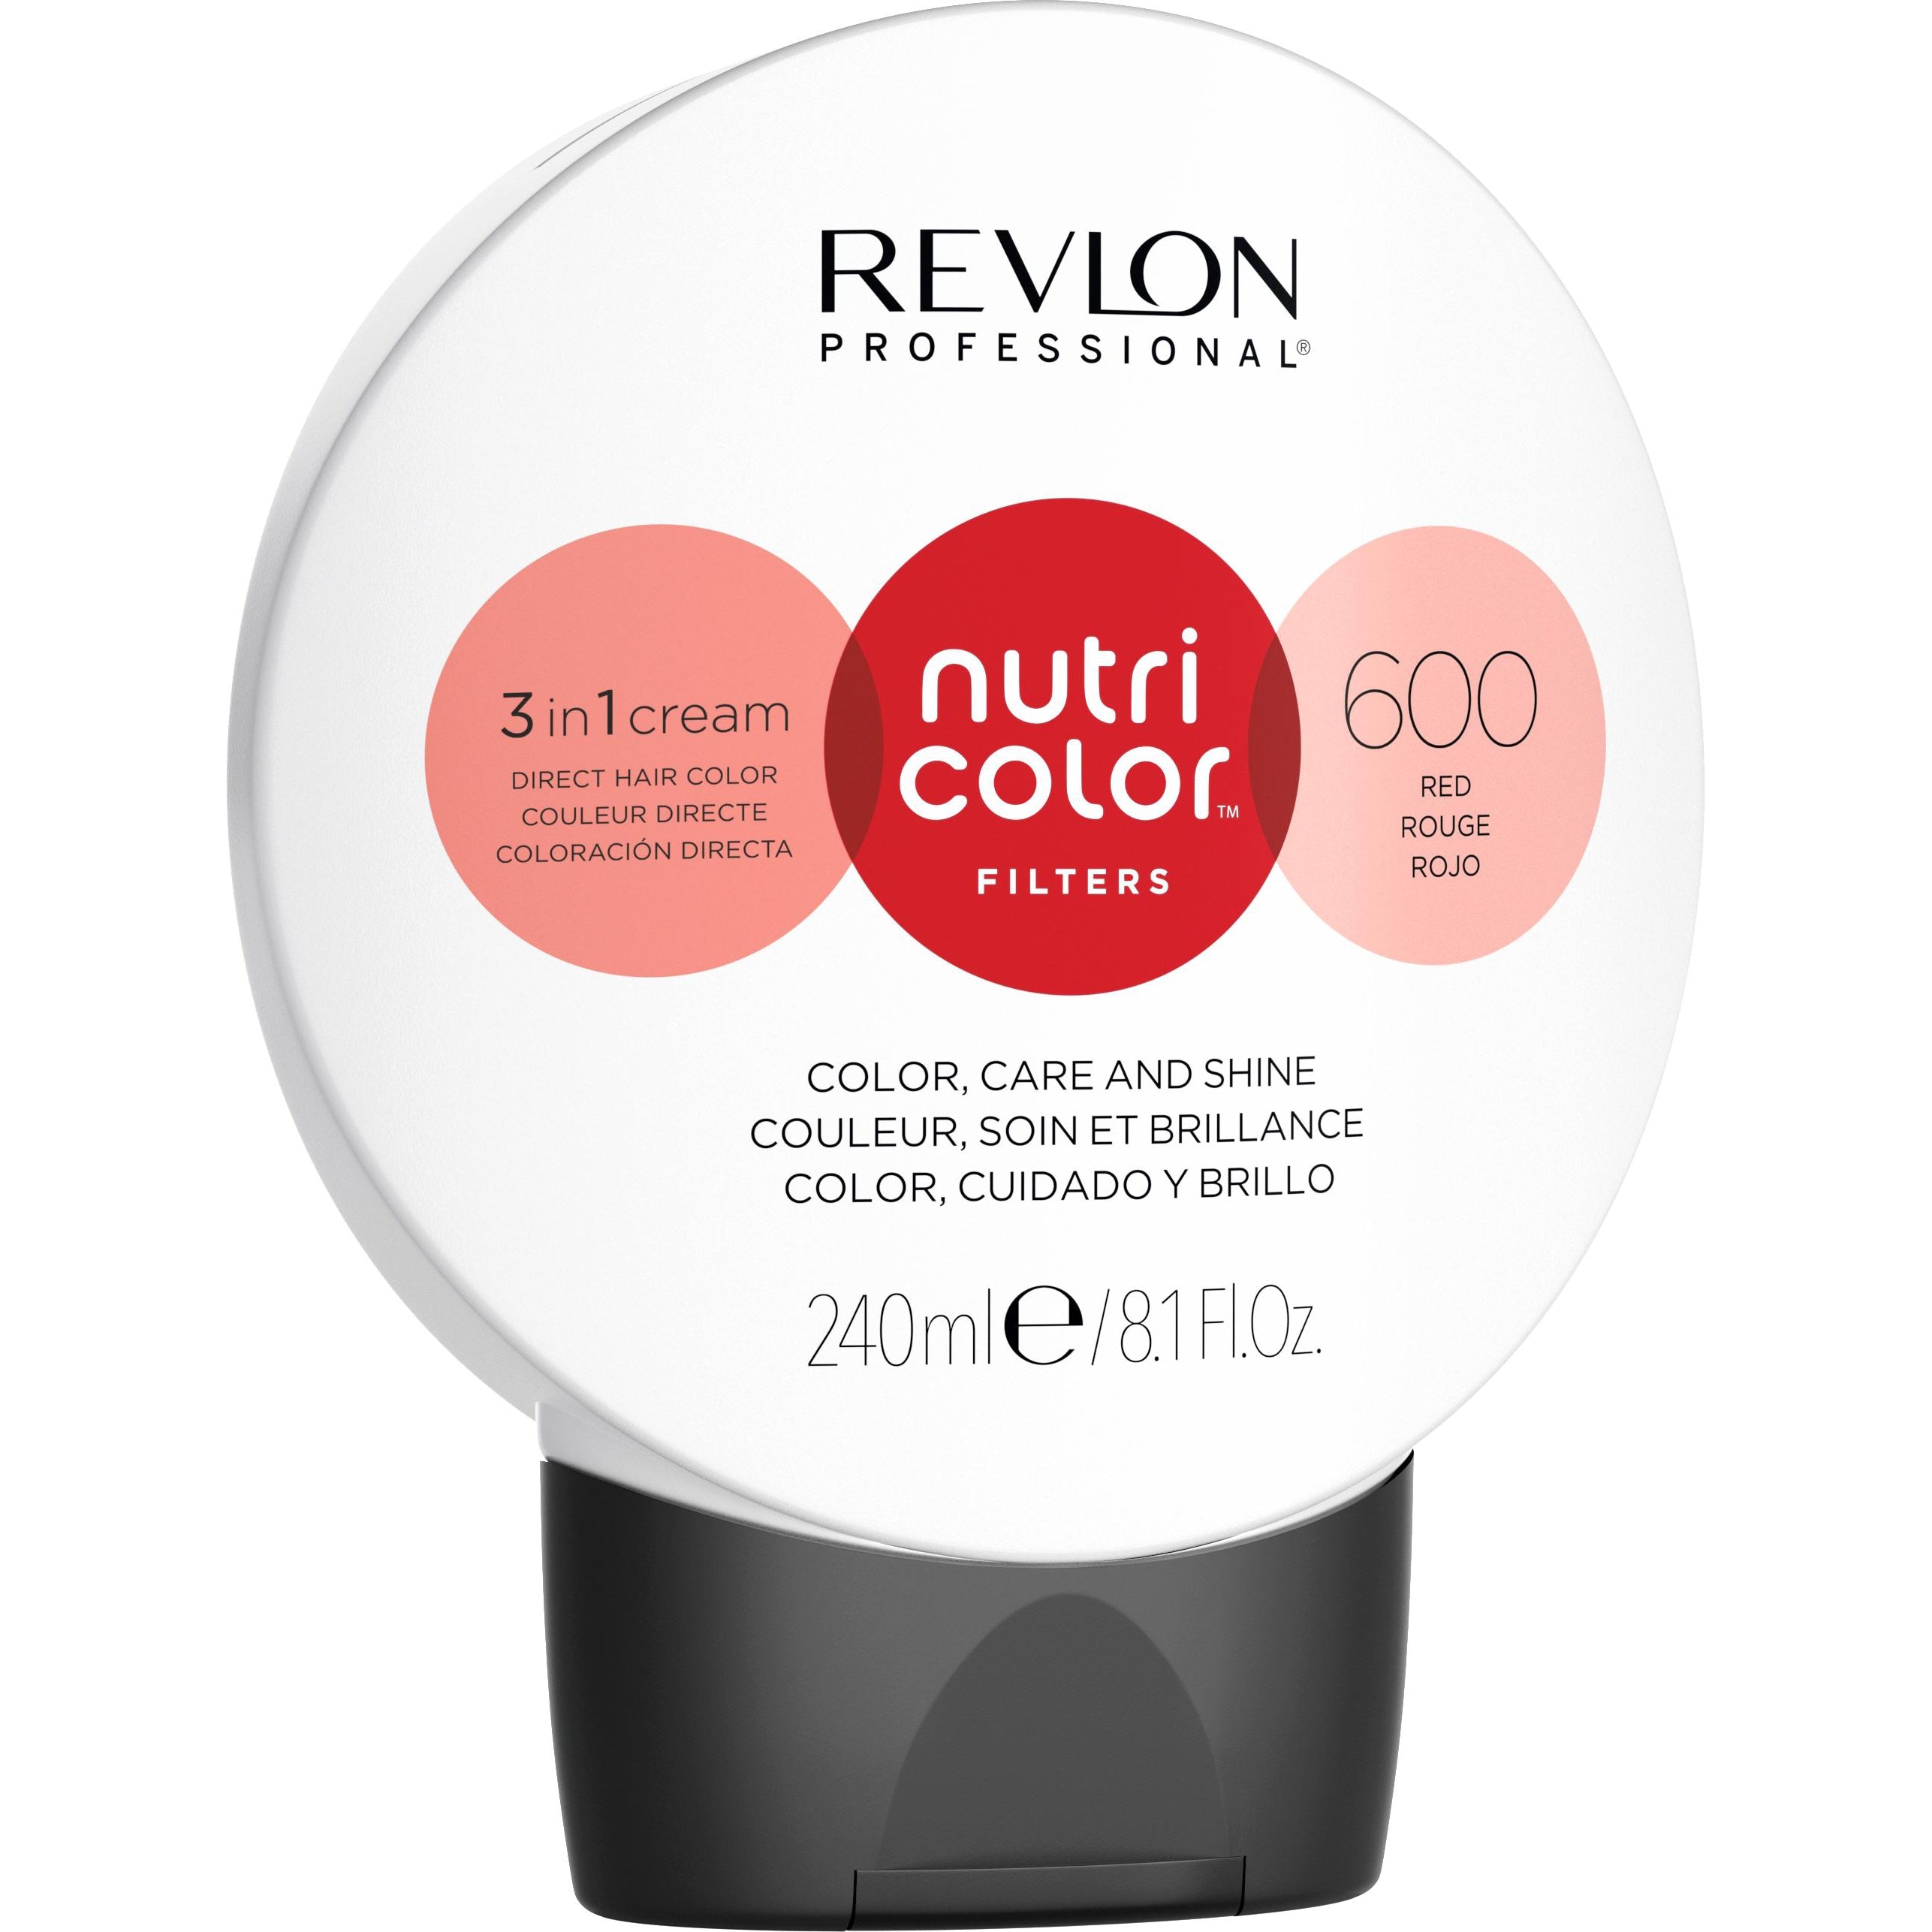 Luxury_haircare_revlon-professional-nutri-color-creme_NCC-Filter-Ball-600